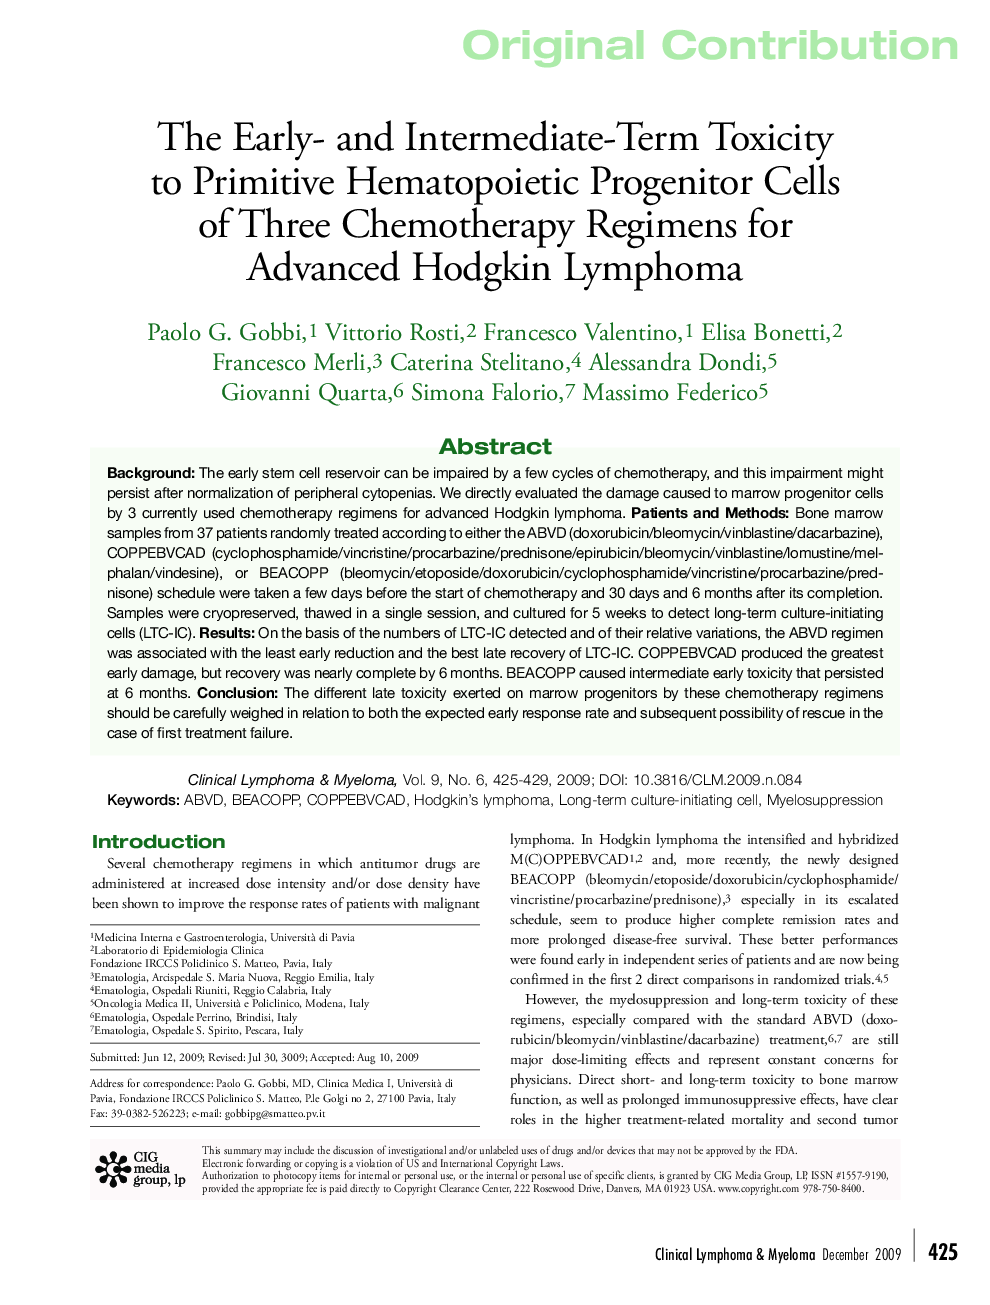 The Early- and Intermediate-Term Toxicity to Primitive Hematopoietic Progenitor Cells of Three Chemotherapy Regimens for Advanced Hodgkin Lymphoma 